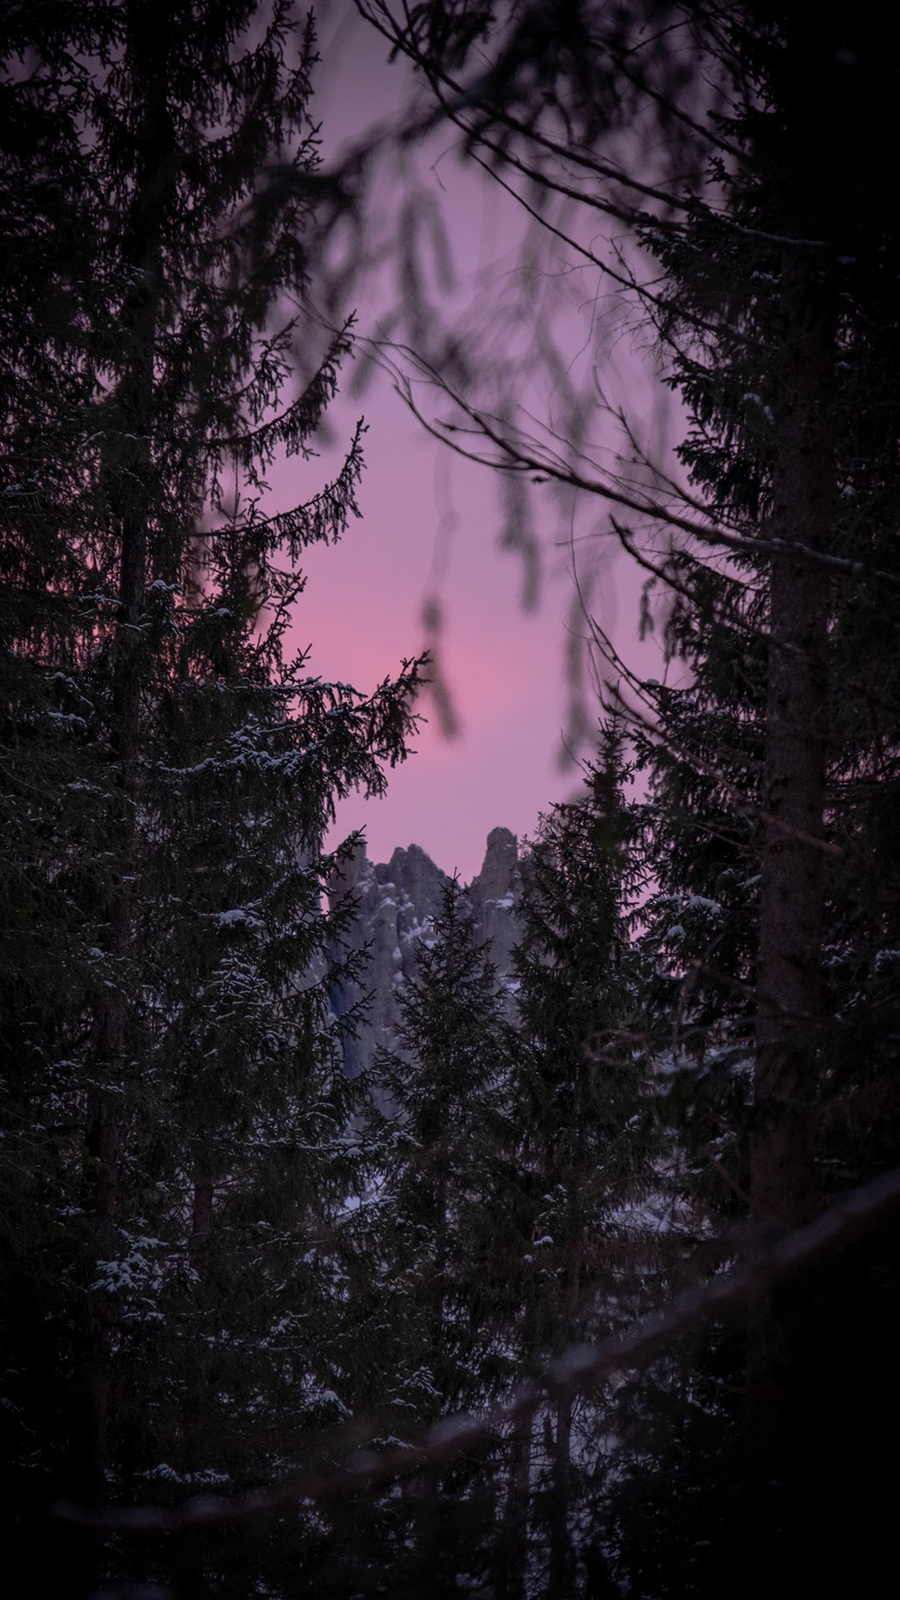 IPhone wallpaper of a pink sky and snow covered trees - Woods